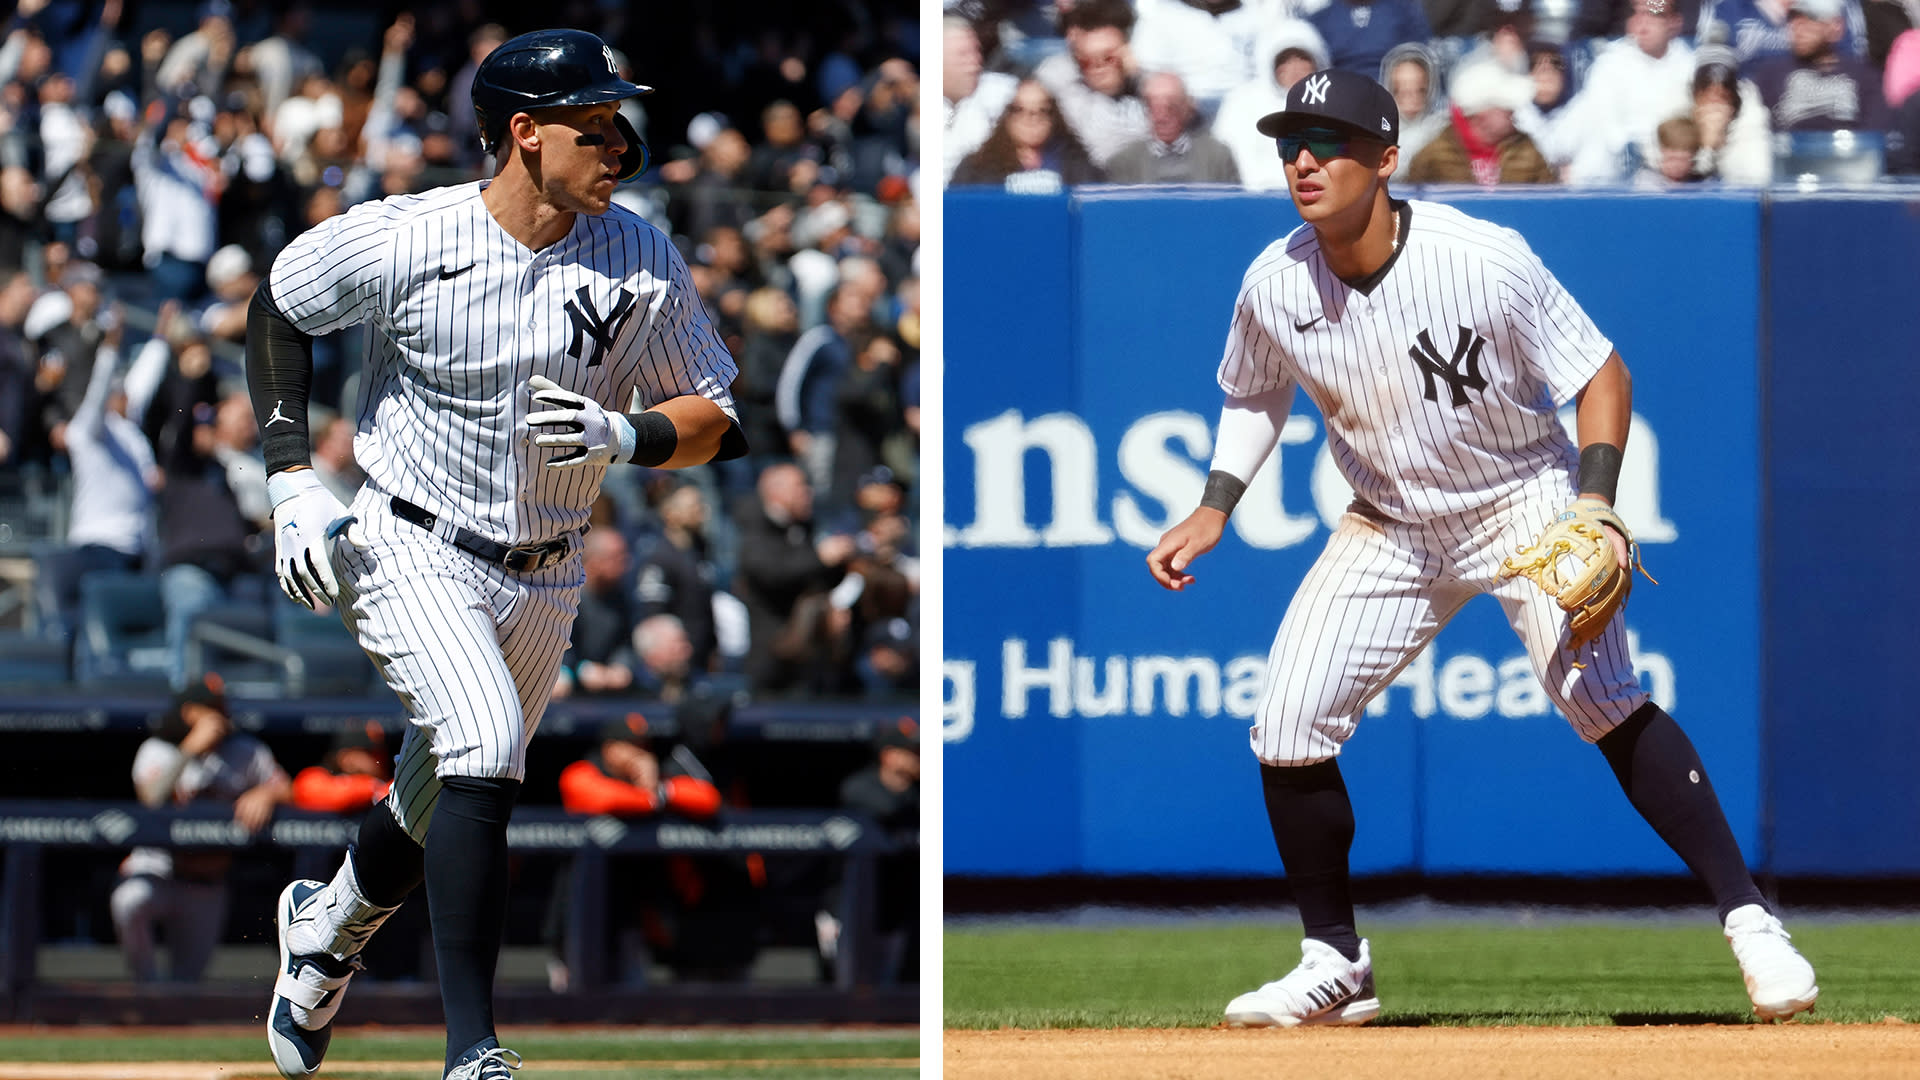 MLB Opening Day observations: Aaron Judge, the pitch-clock effect